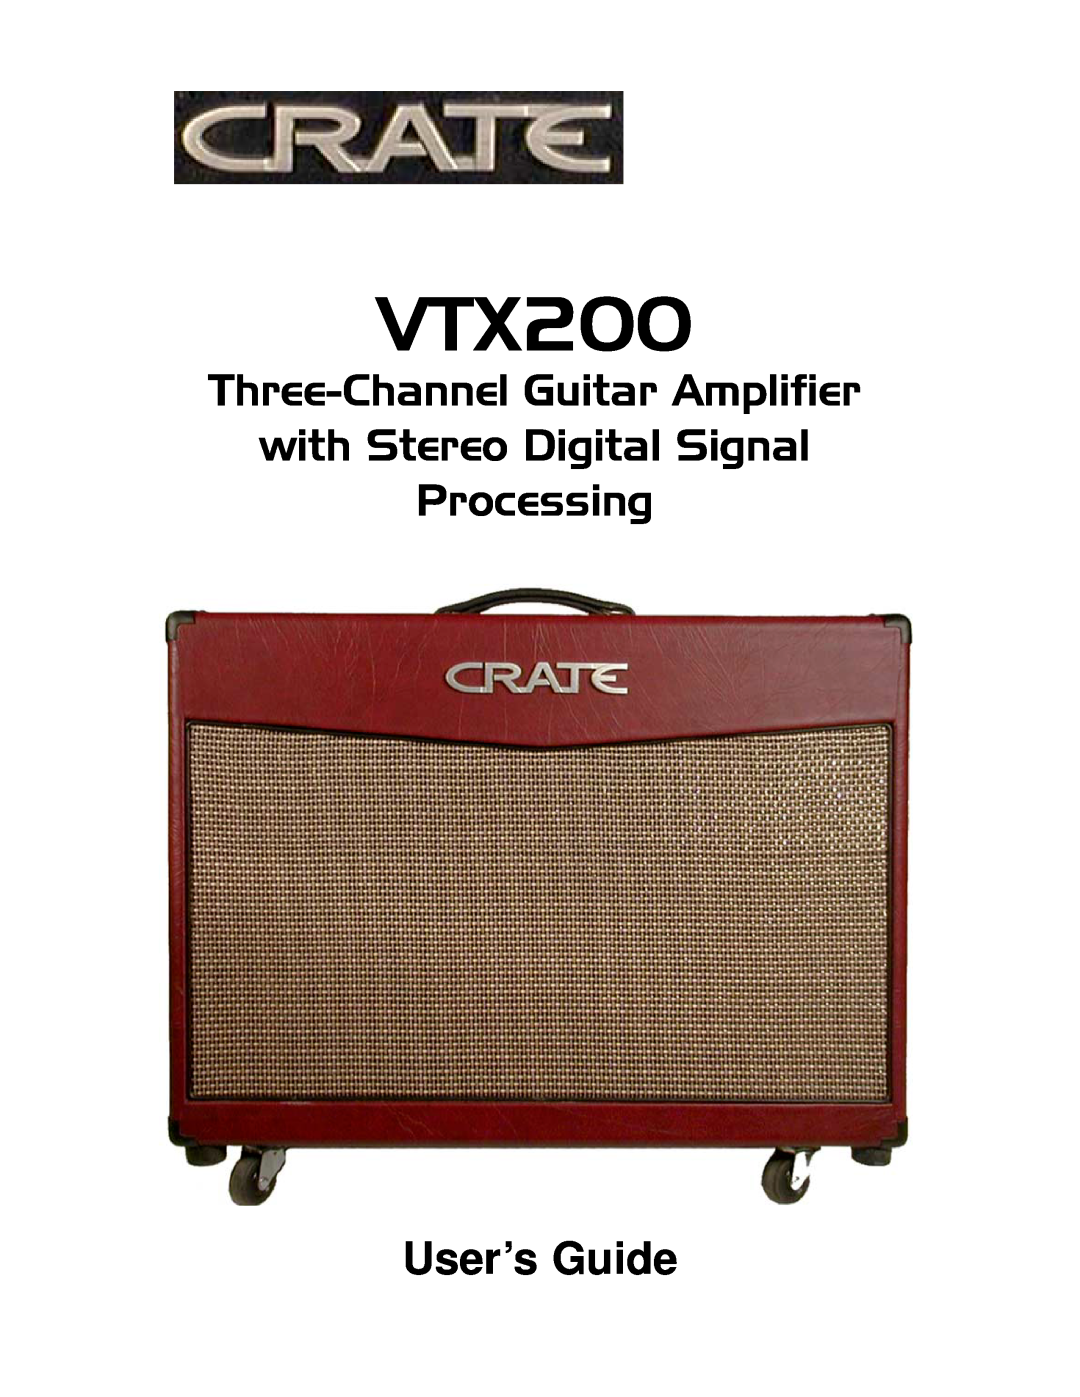 Crate Amplifiers VTX200 manual Three-ChannelGuitar Amplifier, with Stereo Digital Signal Processing, User’s Guide 